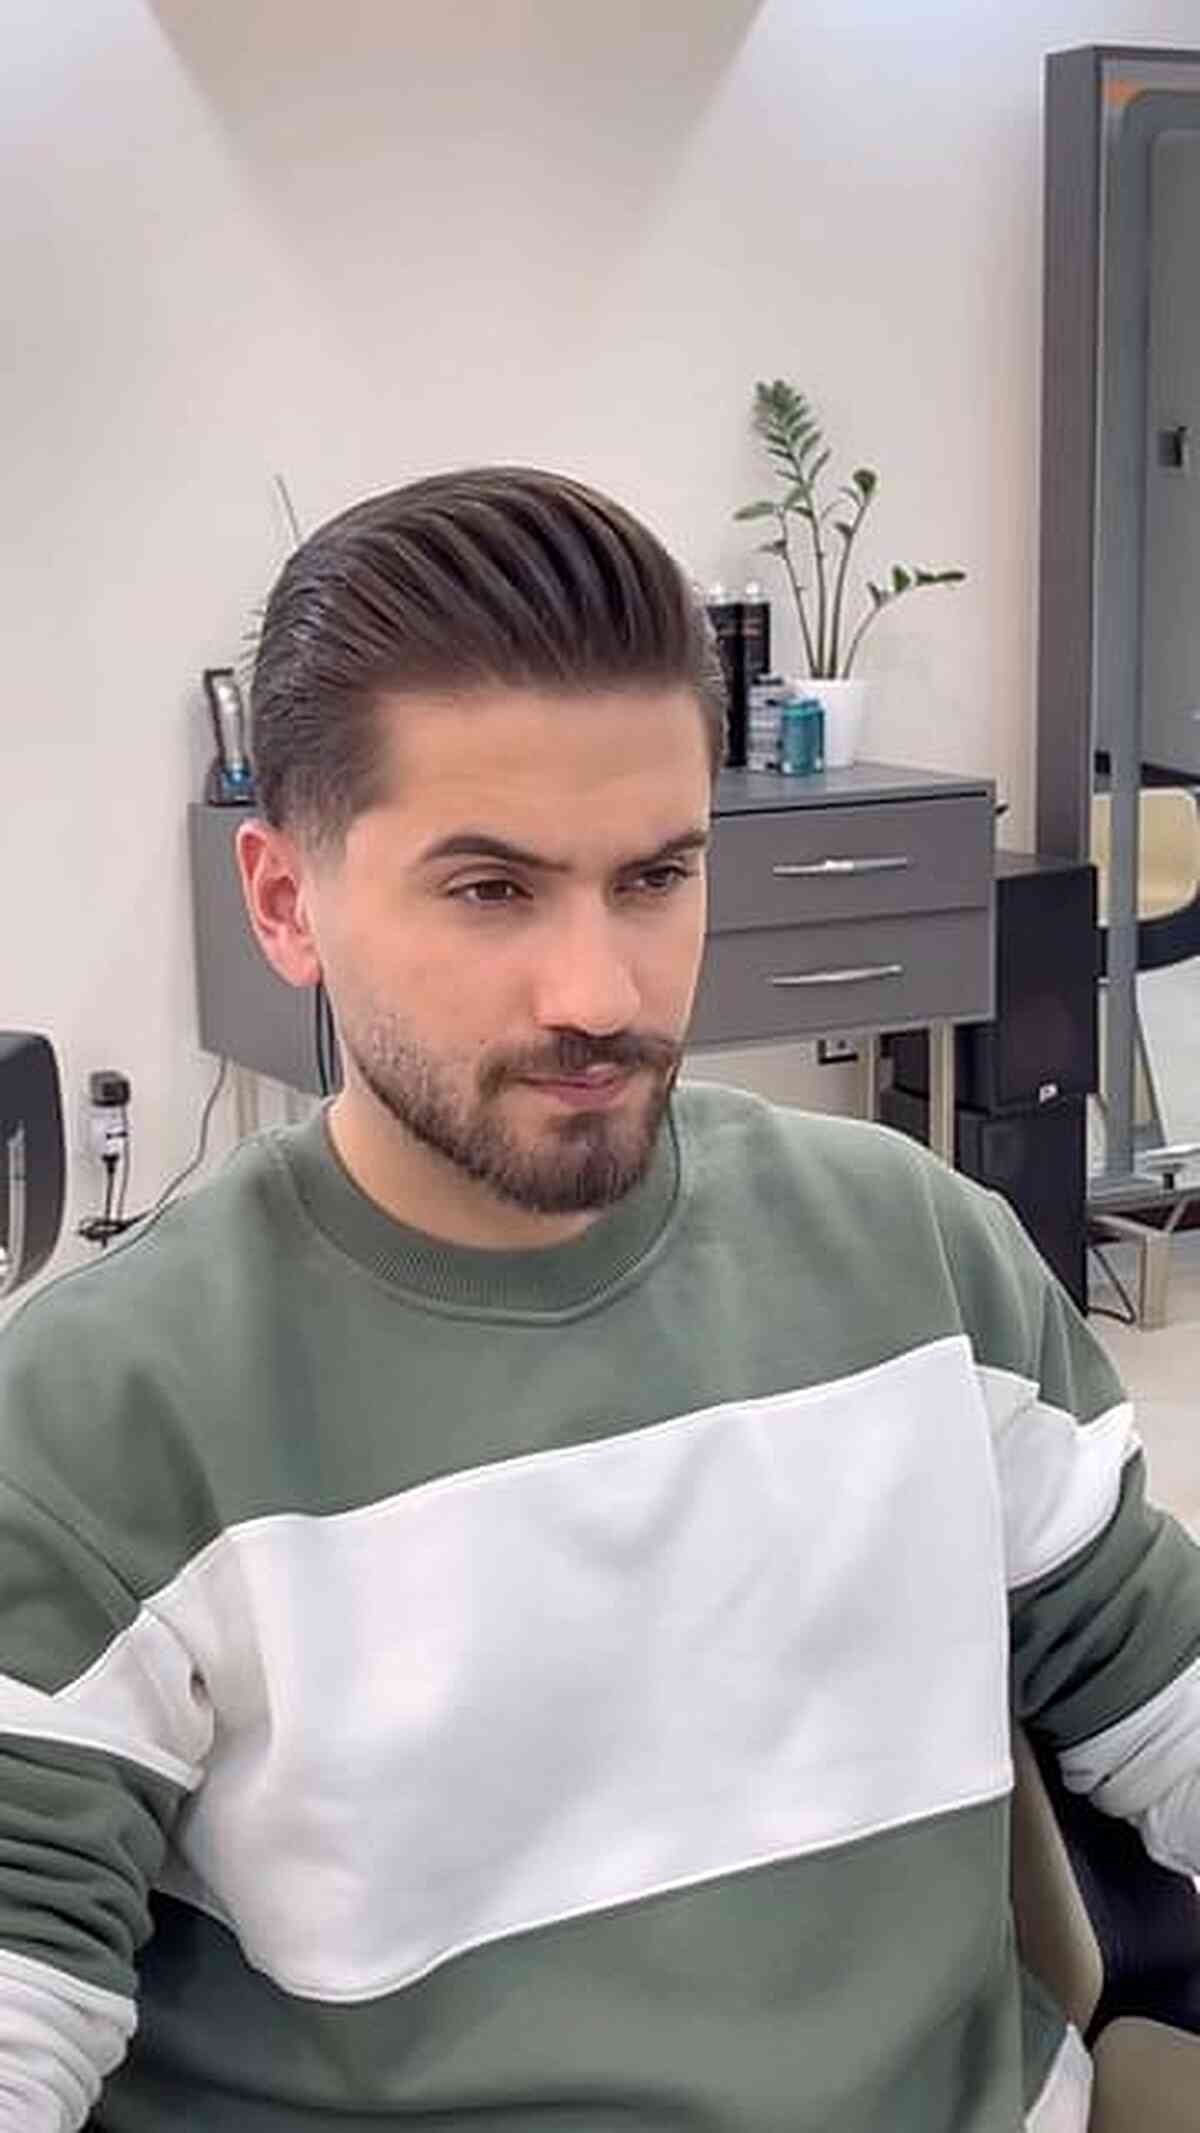 Hairstyle for men with longer hair on top and brushed back sides on Craiyon